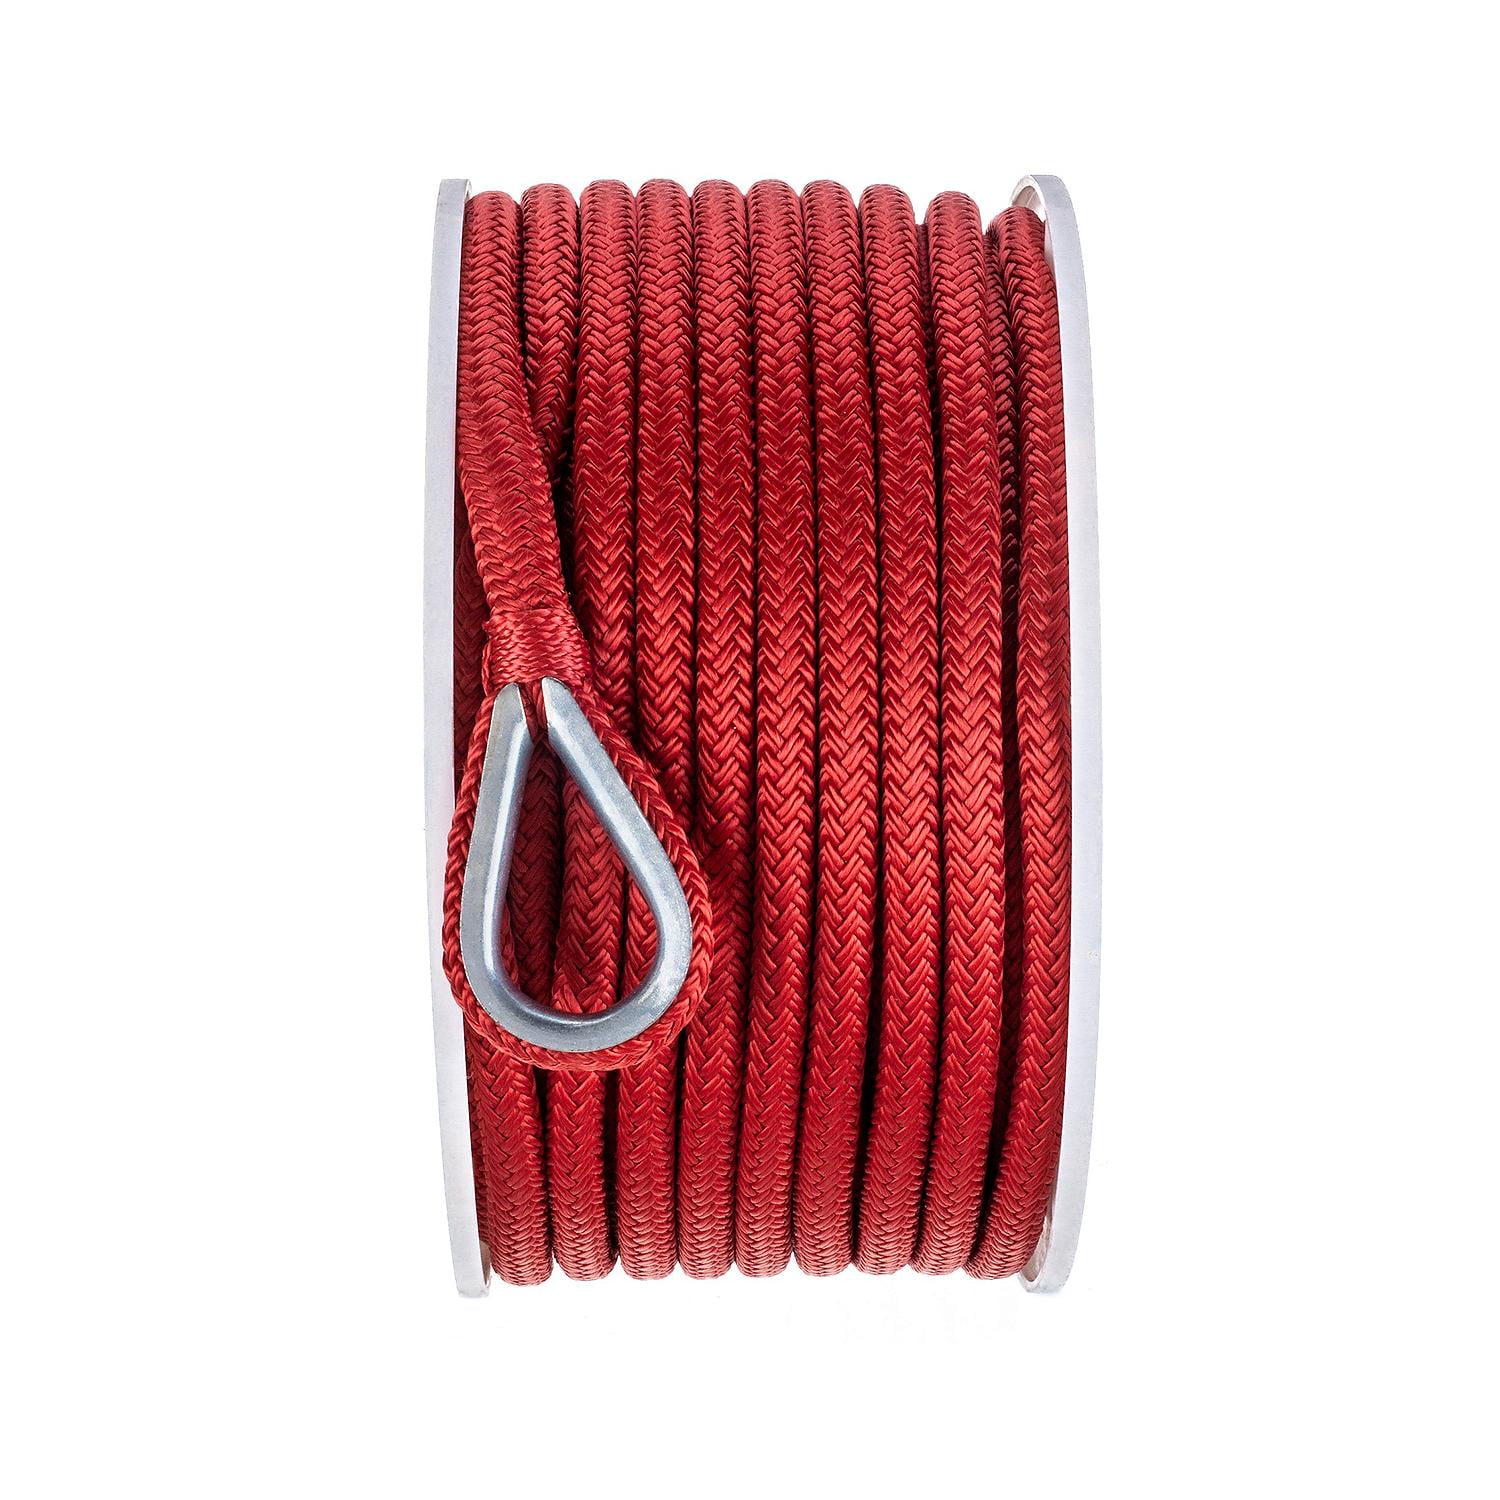 Sea Rock Marine 100’ x 3/8” Double Braid Nylon Anchor Rope with 316SS Thimble - Anchor Line for Boats, Quality Boat Rope, Marine Rope, Boat